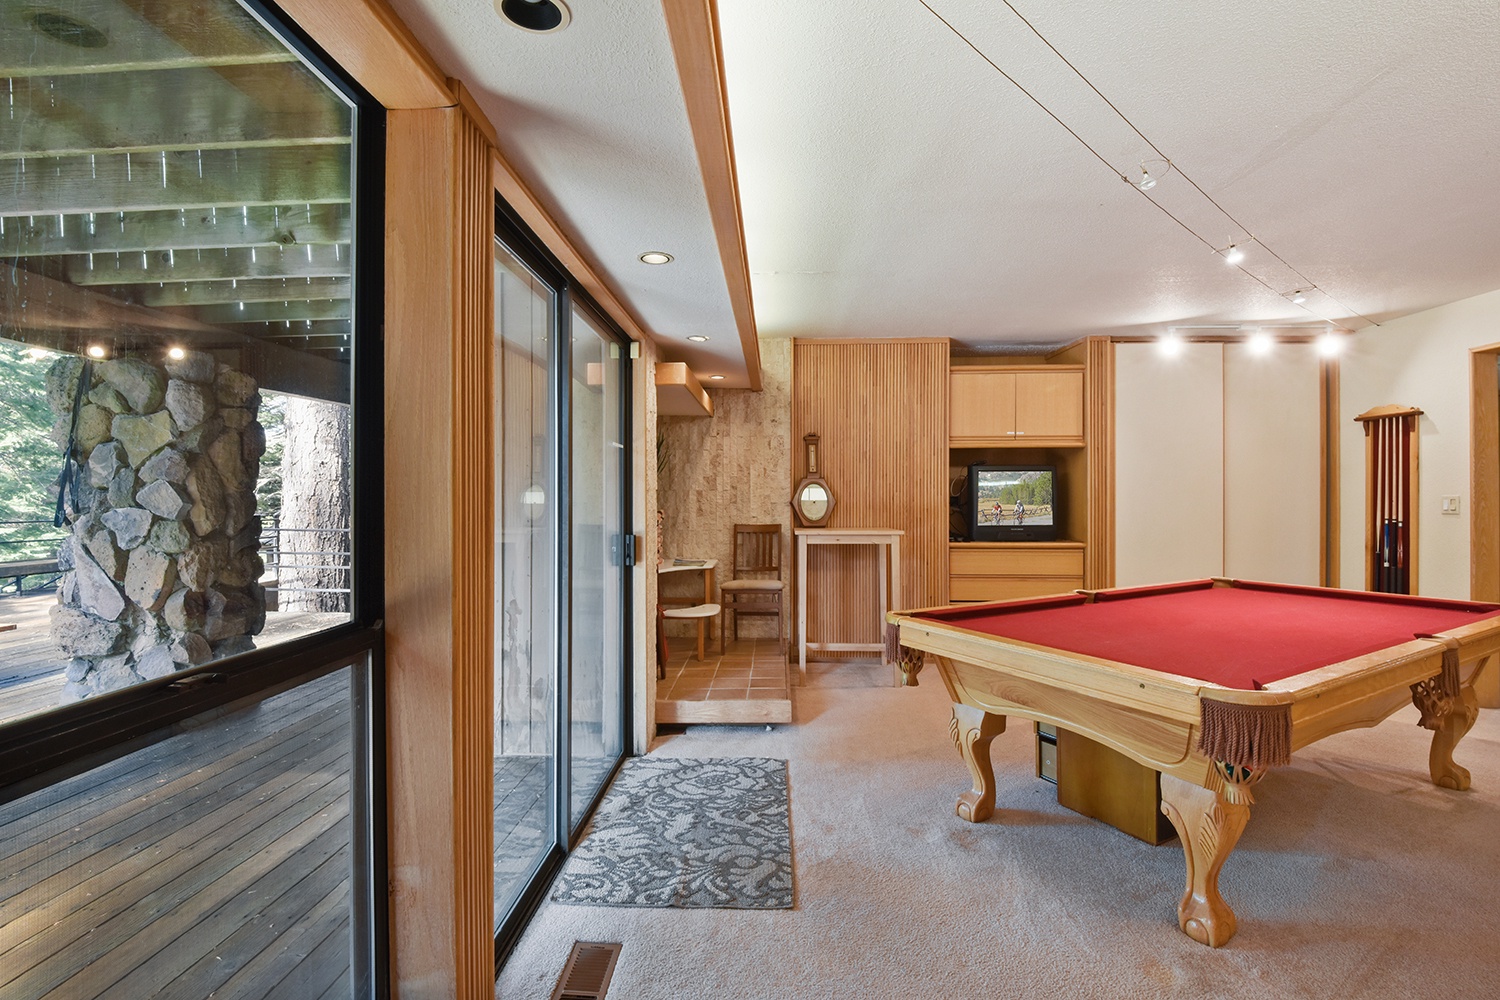 Ground level game room with pool table, and TV